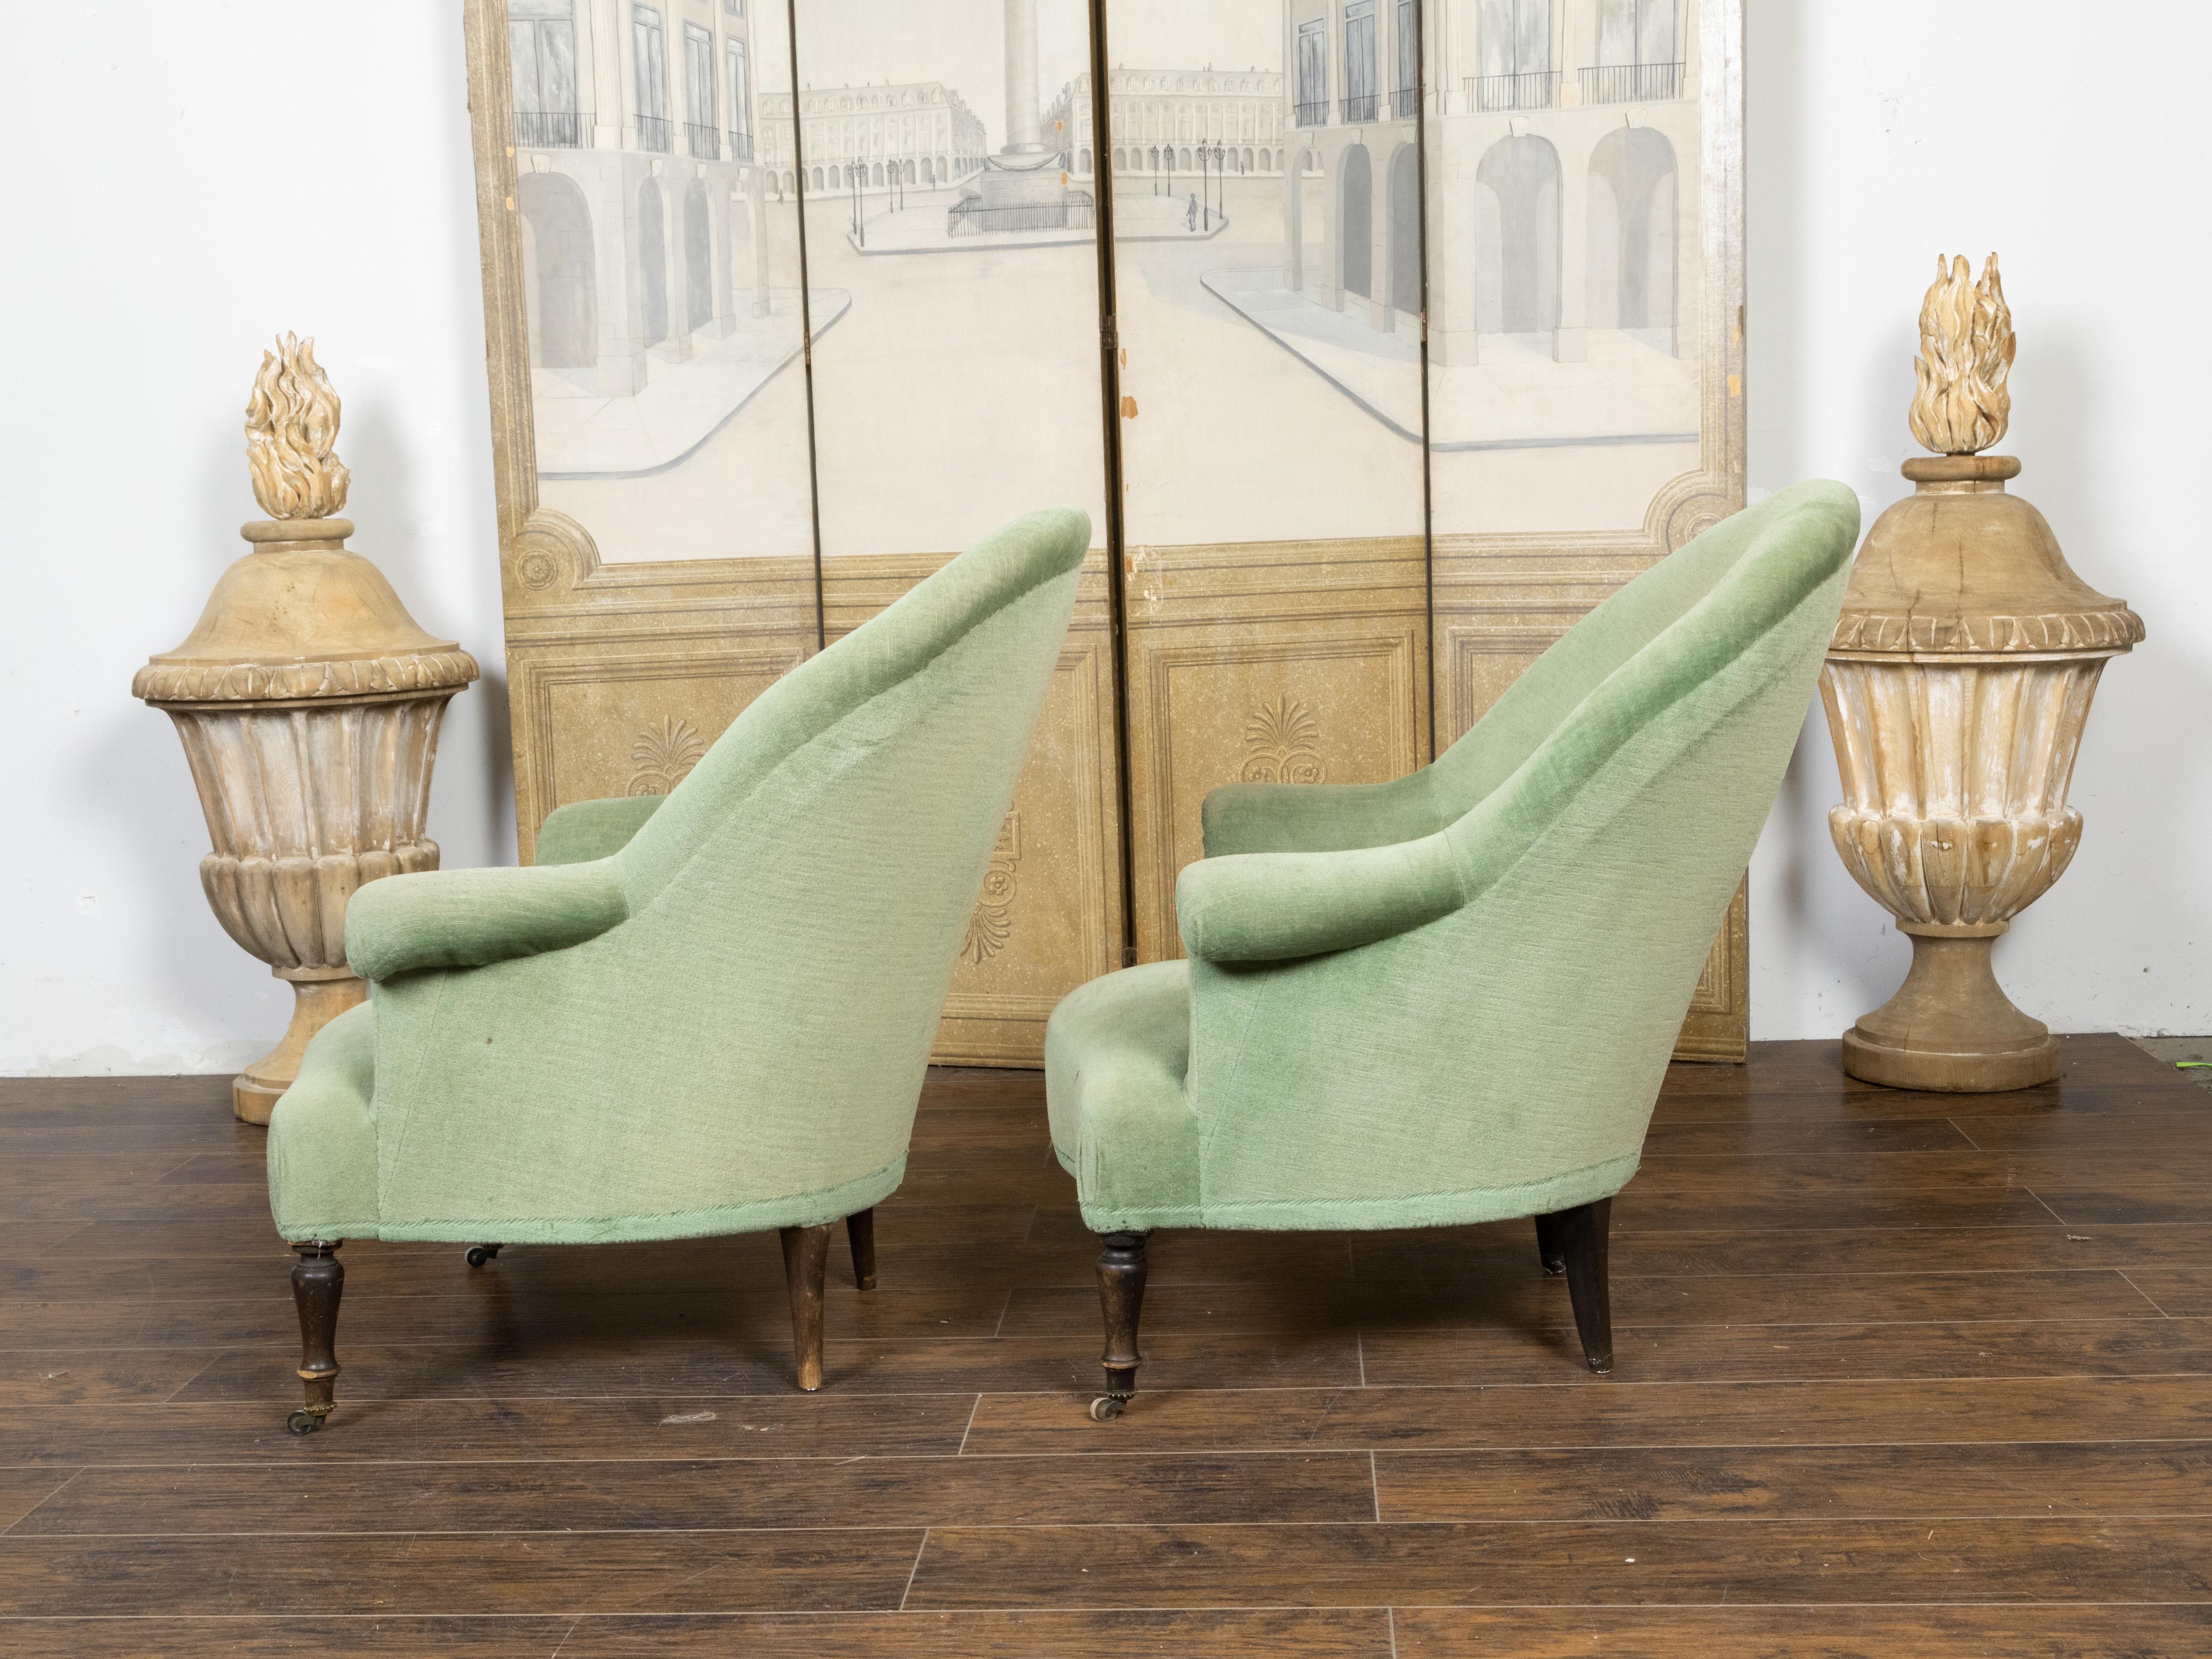 20th Century Pair of French Turn of the Century Bergère Chairs with Green Velvet Upholstery For Sale